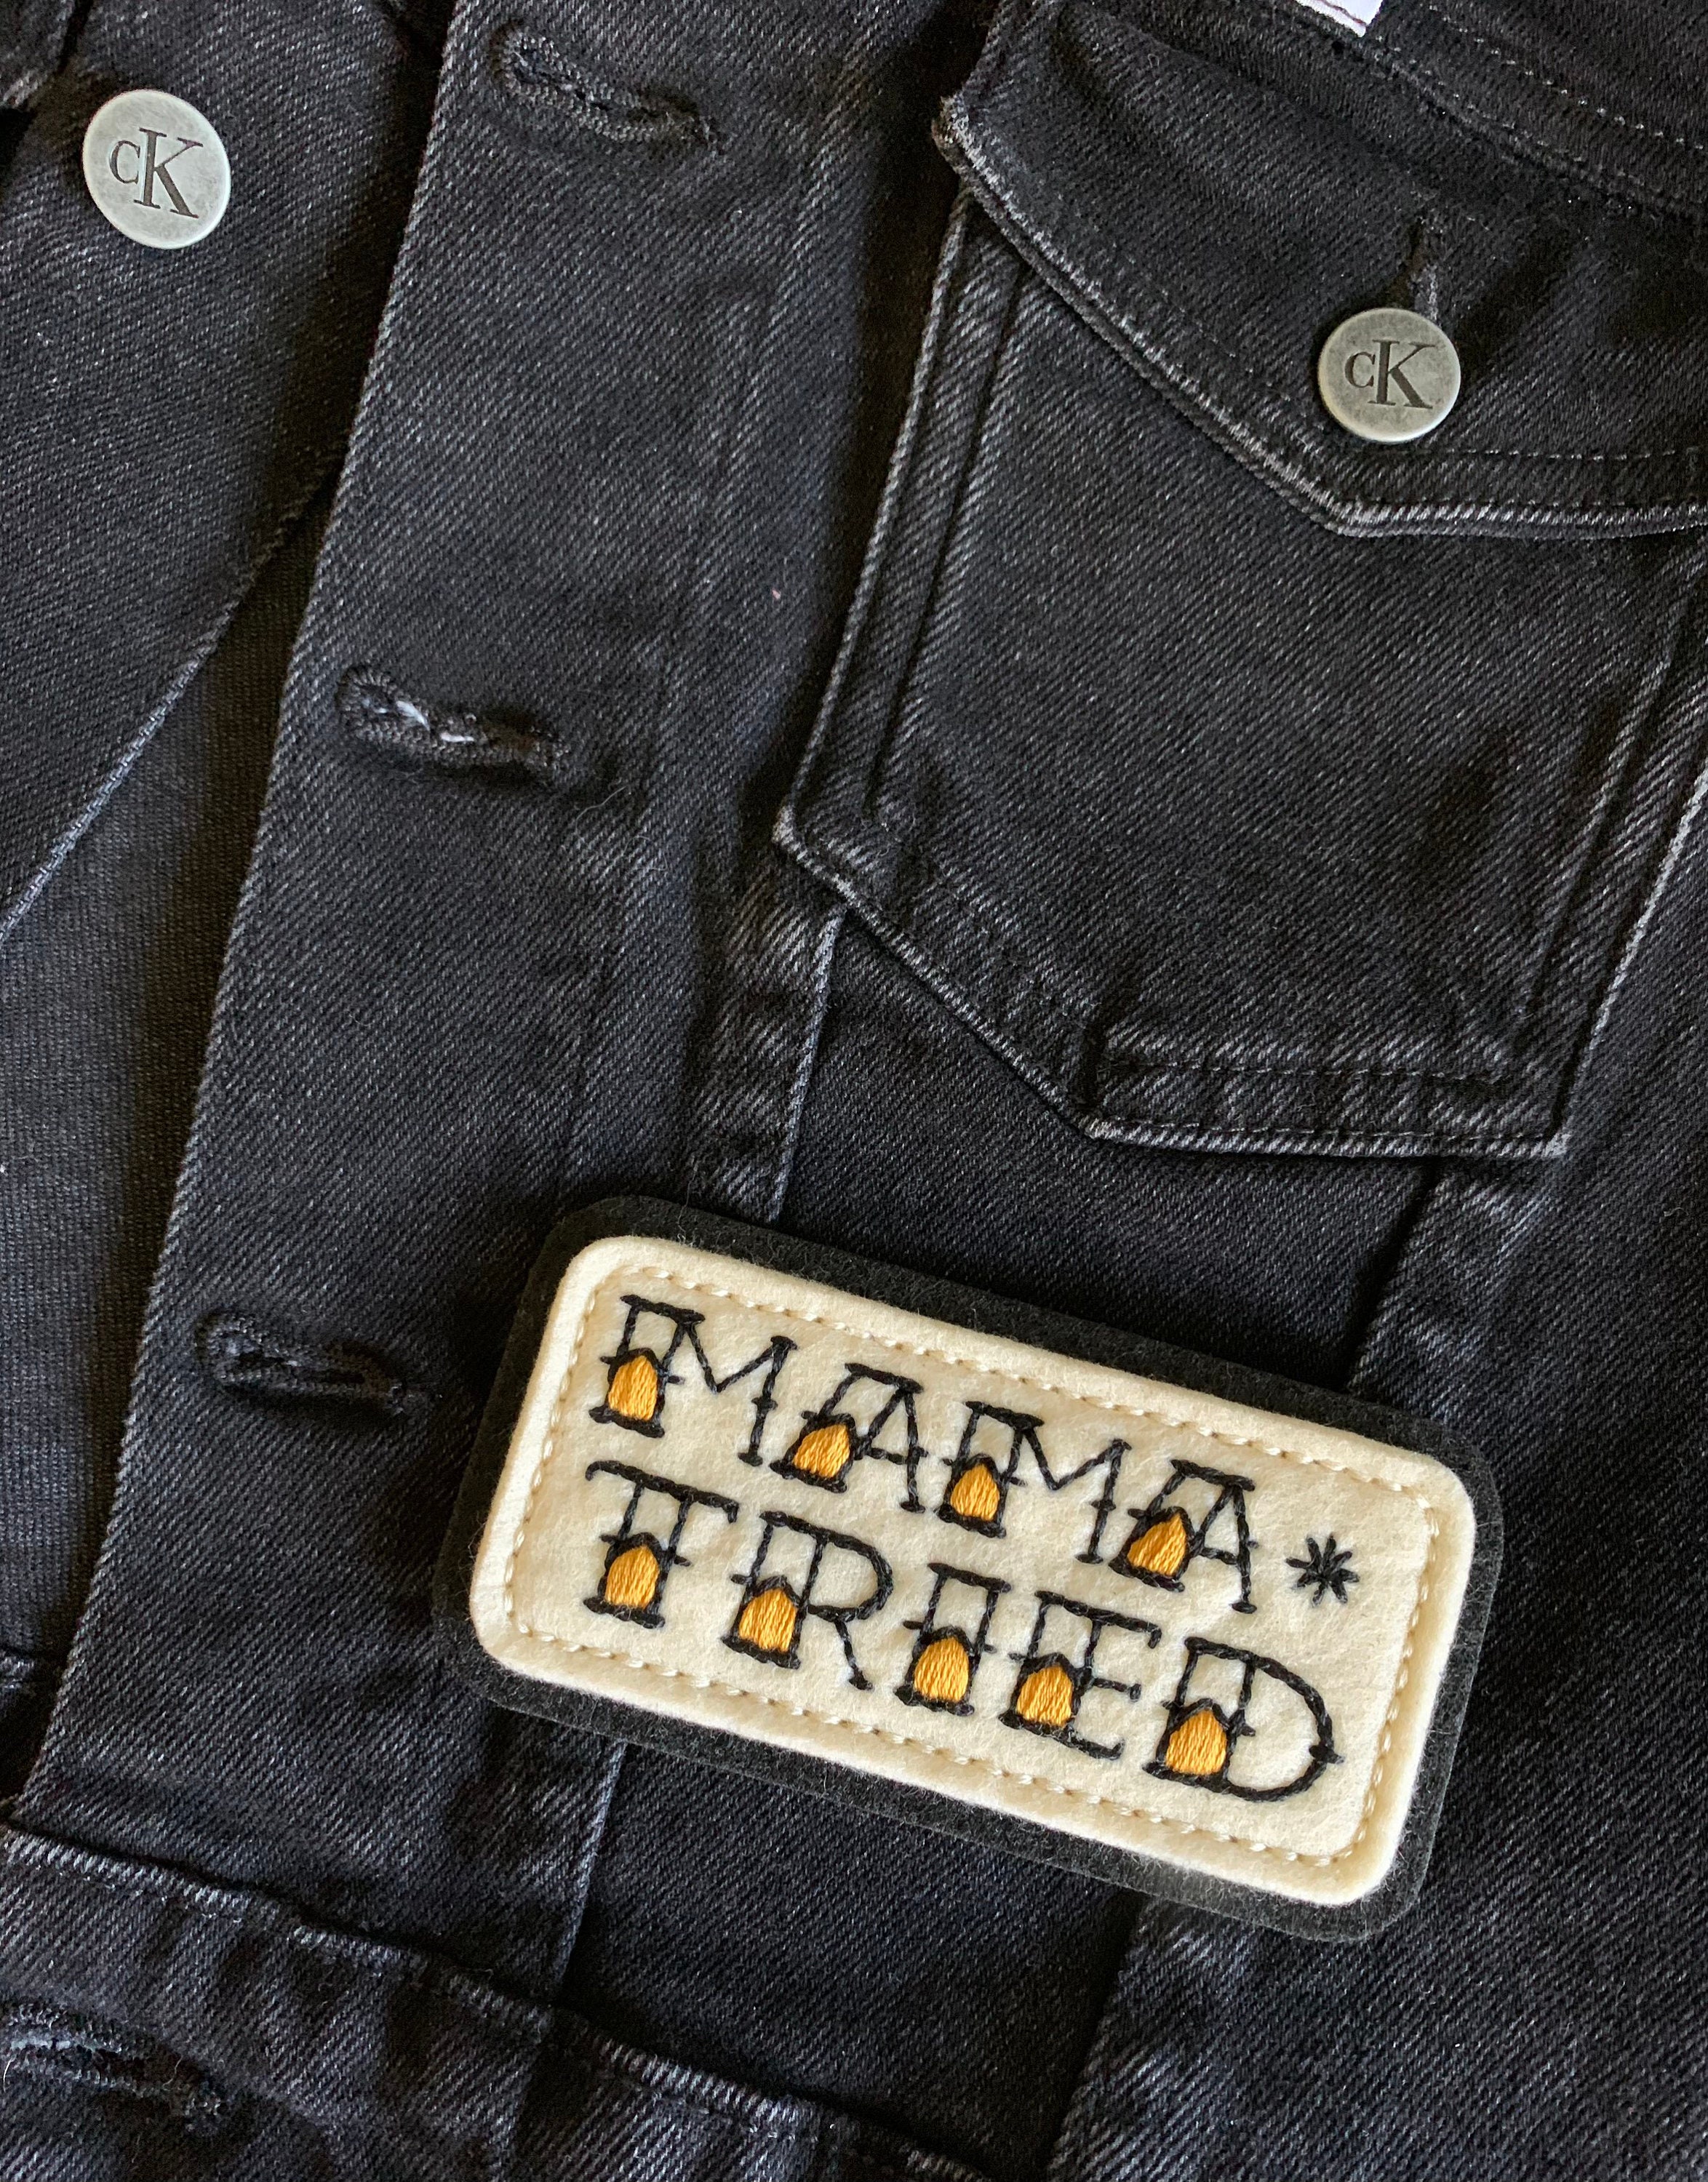 No “before” sadly but) Blown-out knee and tears fixed with patterned fabric  patch (+ extended embroidery!) and embroidered felt patches :  r/Visiblemending